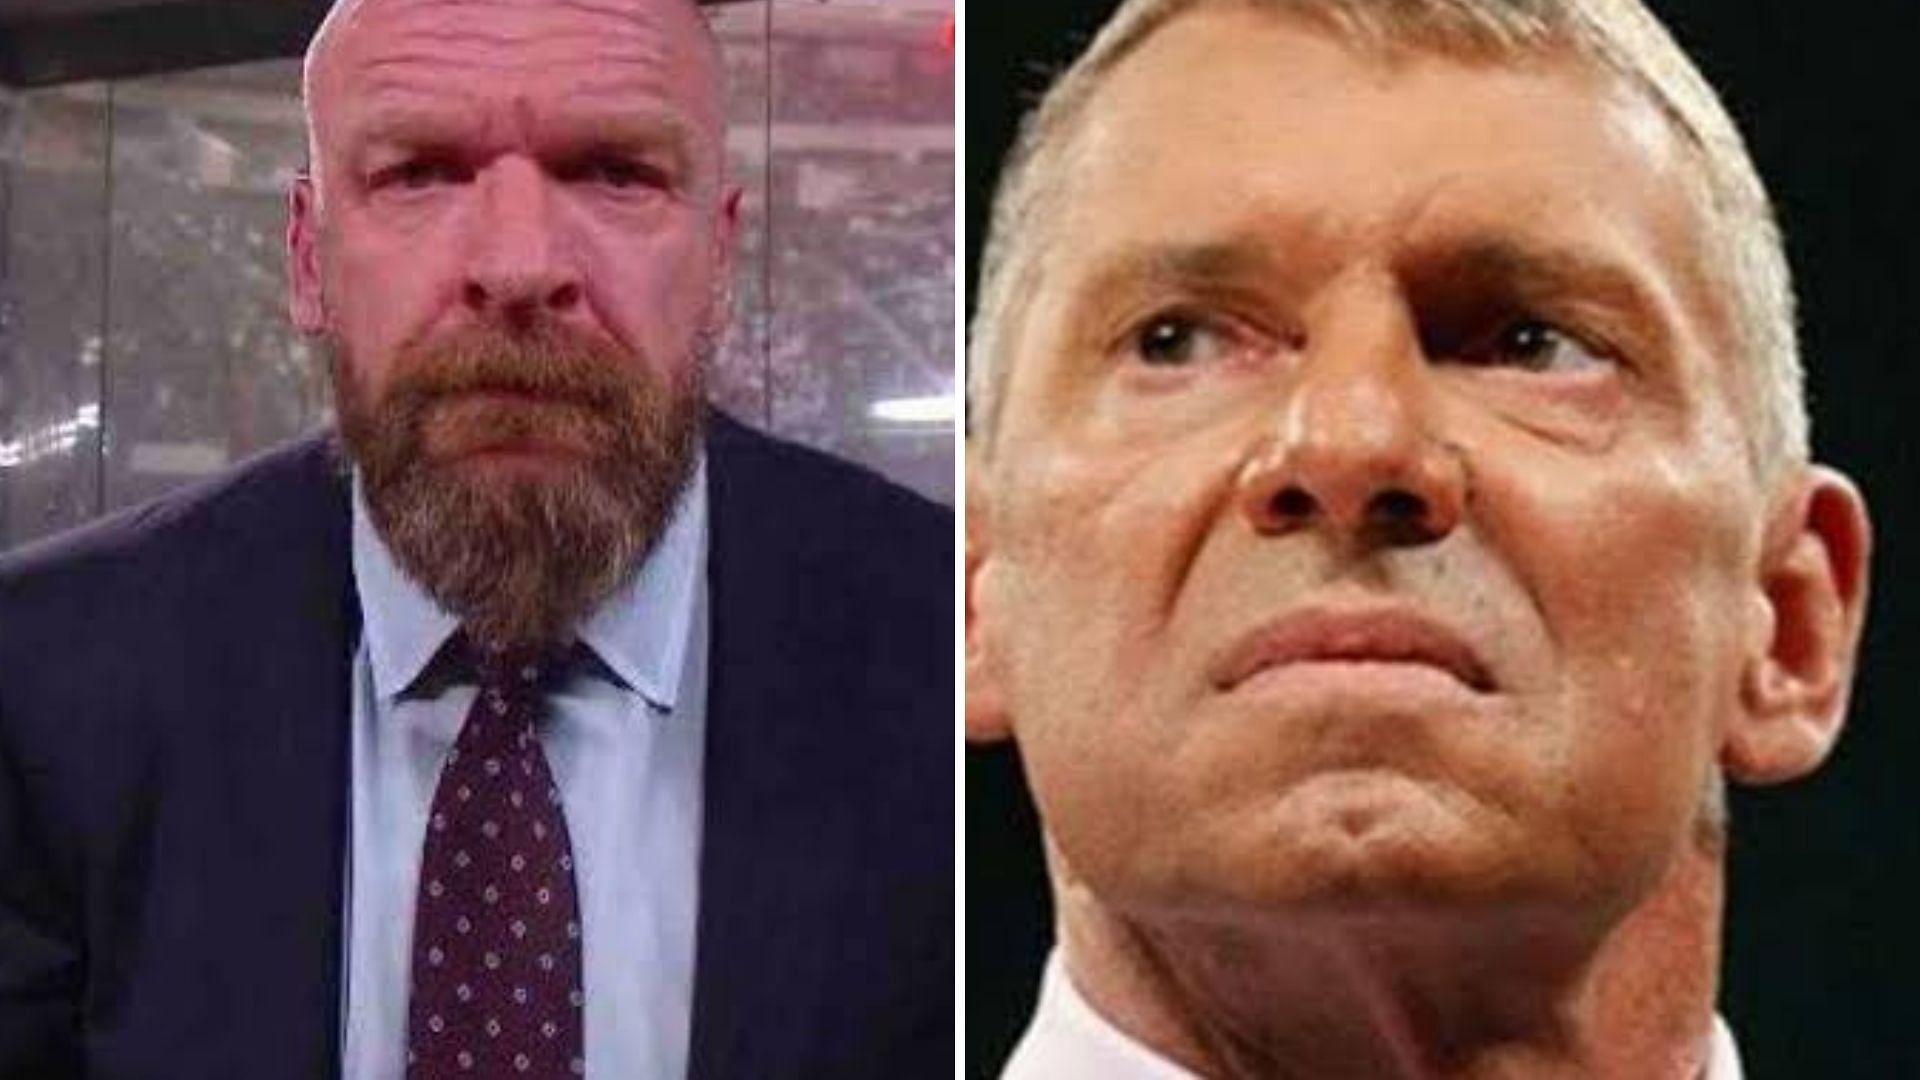 HHH has made some bold choices since assuming leadership.